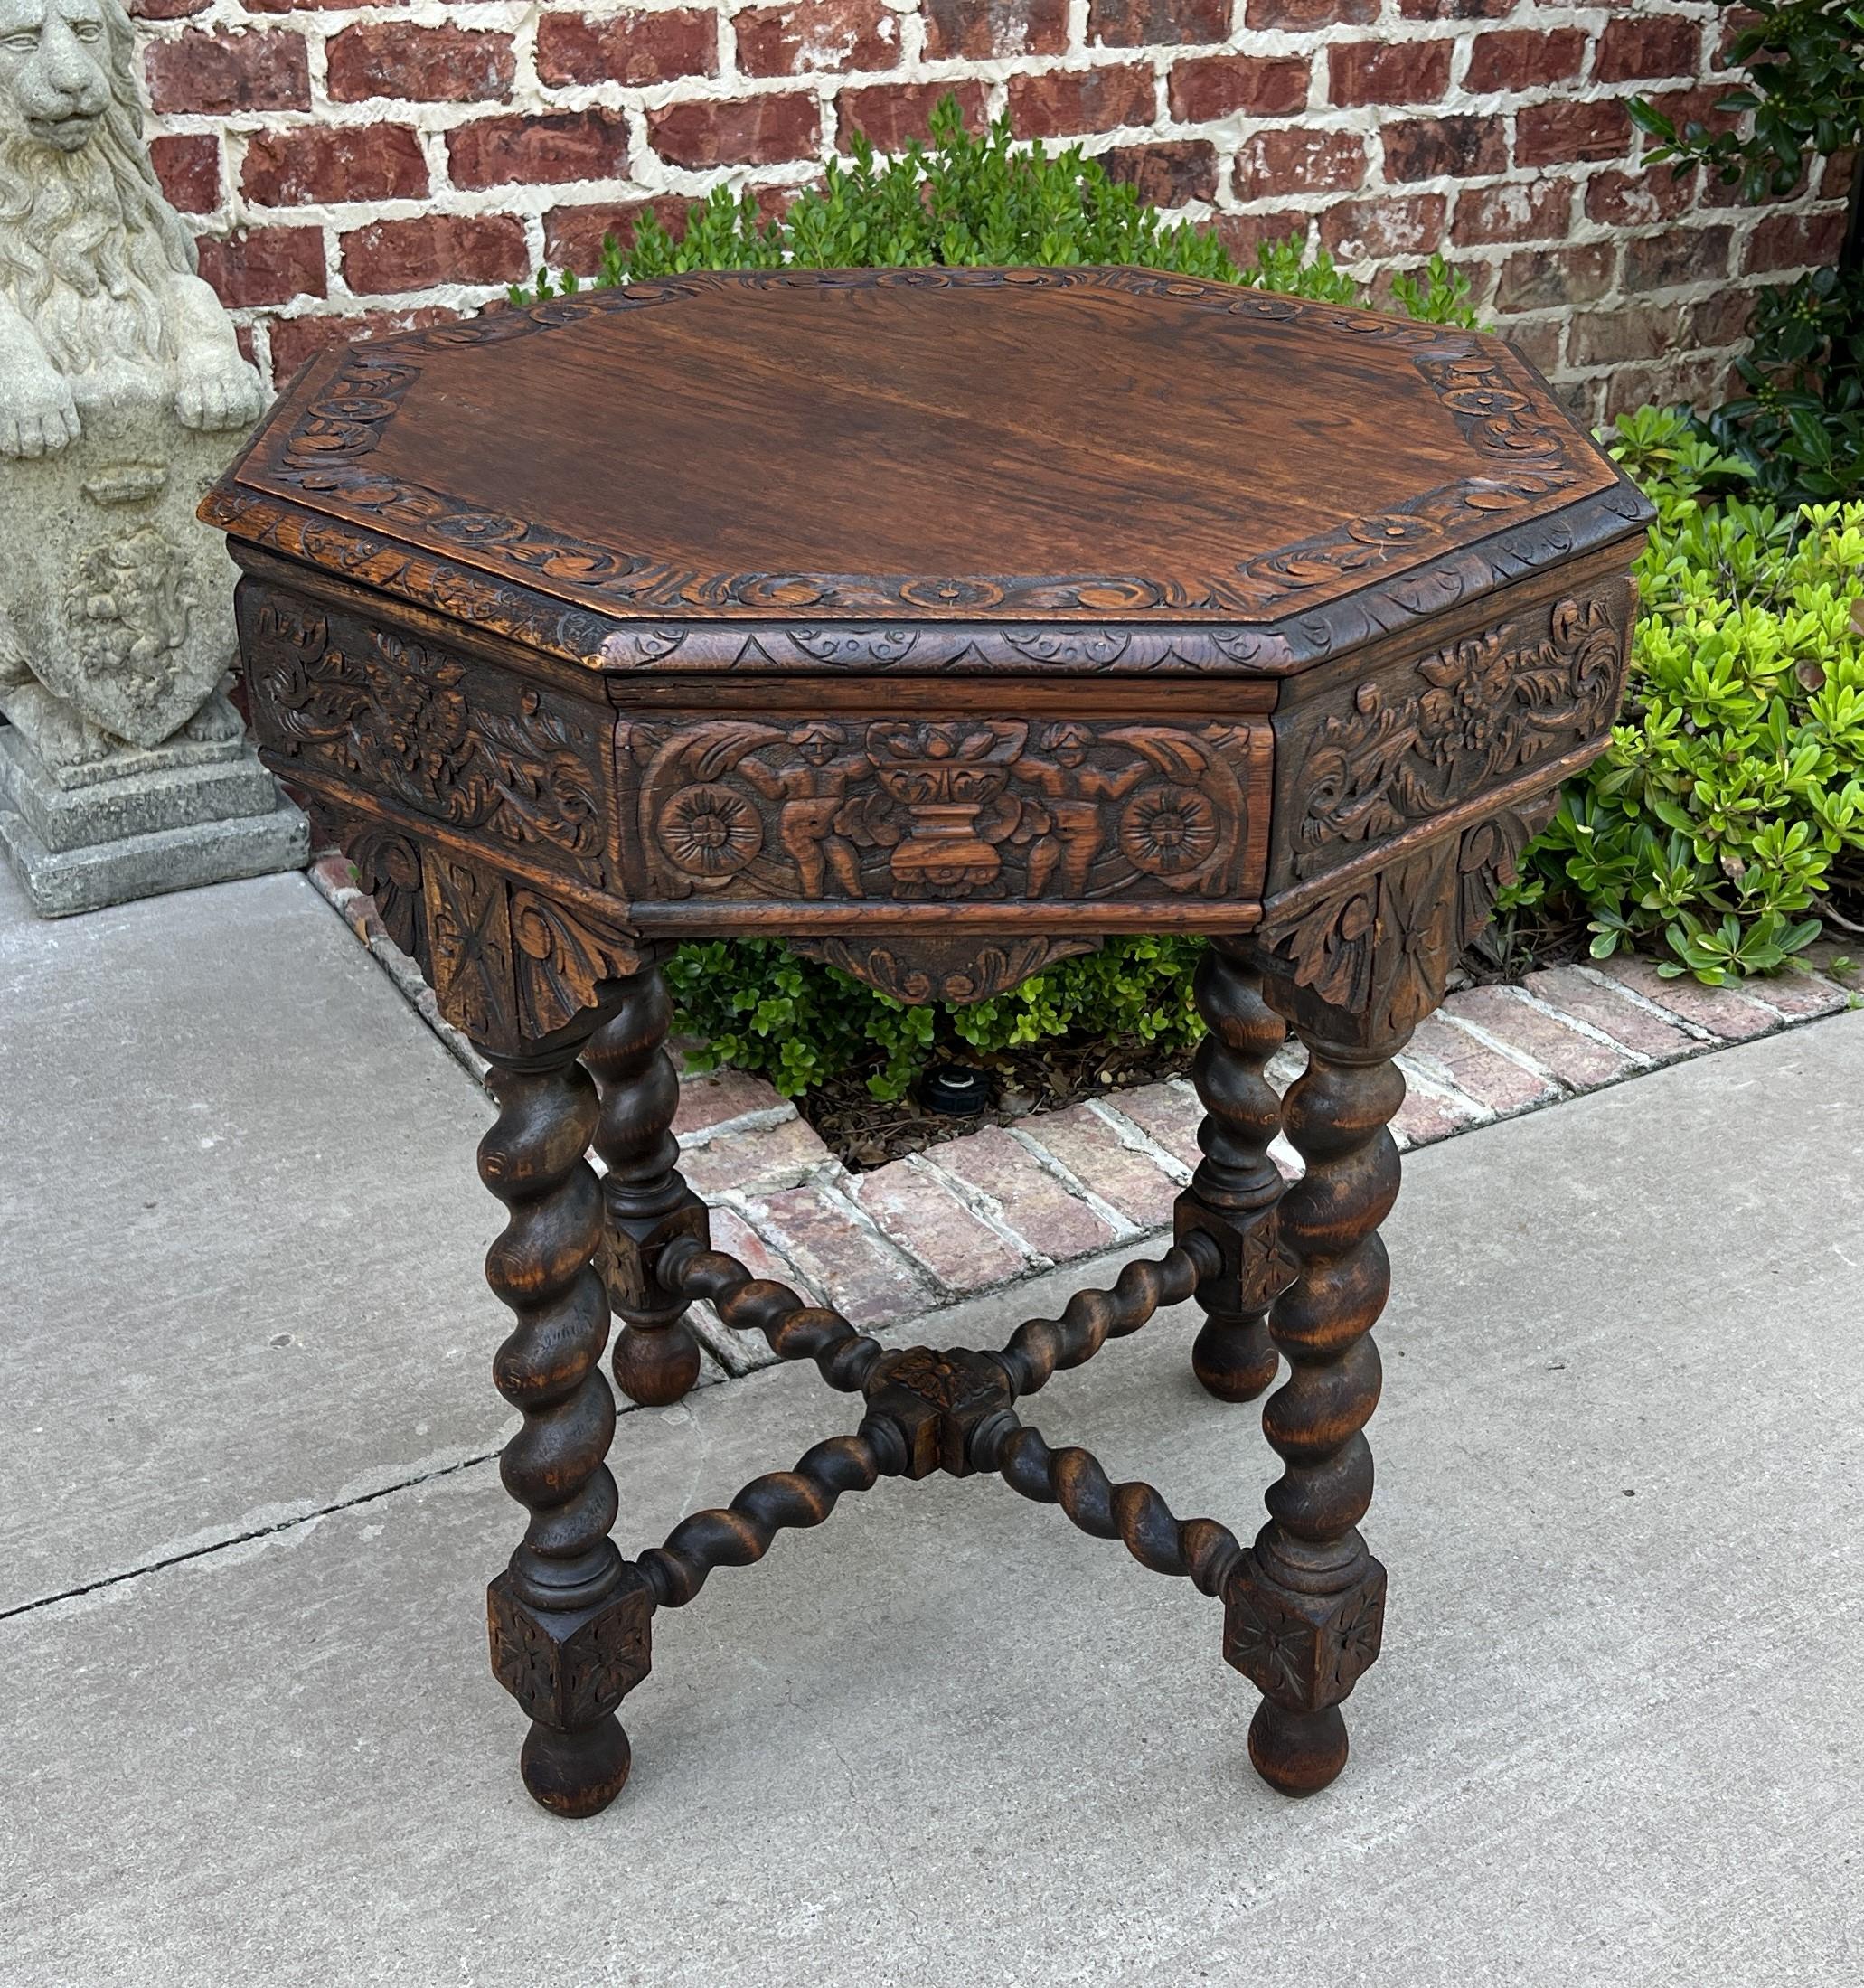 Antique French Table Barley Twist Octagonal Renaissance Revival Carved Oak 19thc In Good Condition For Sale In Tyler, TX